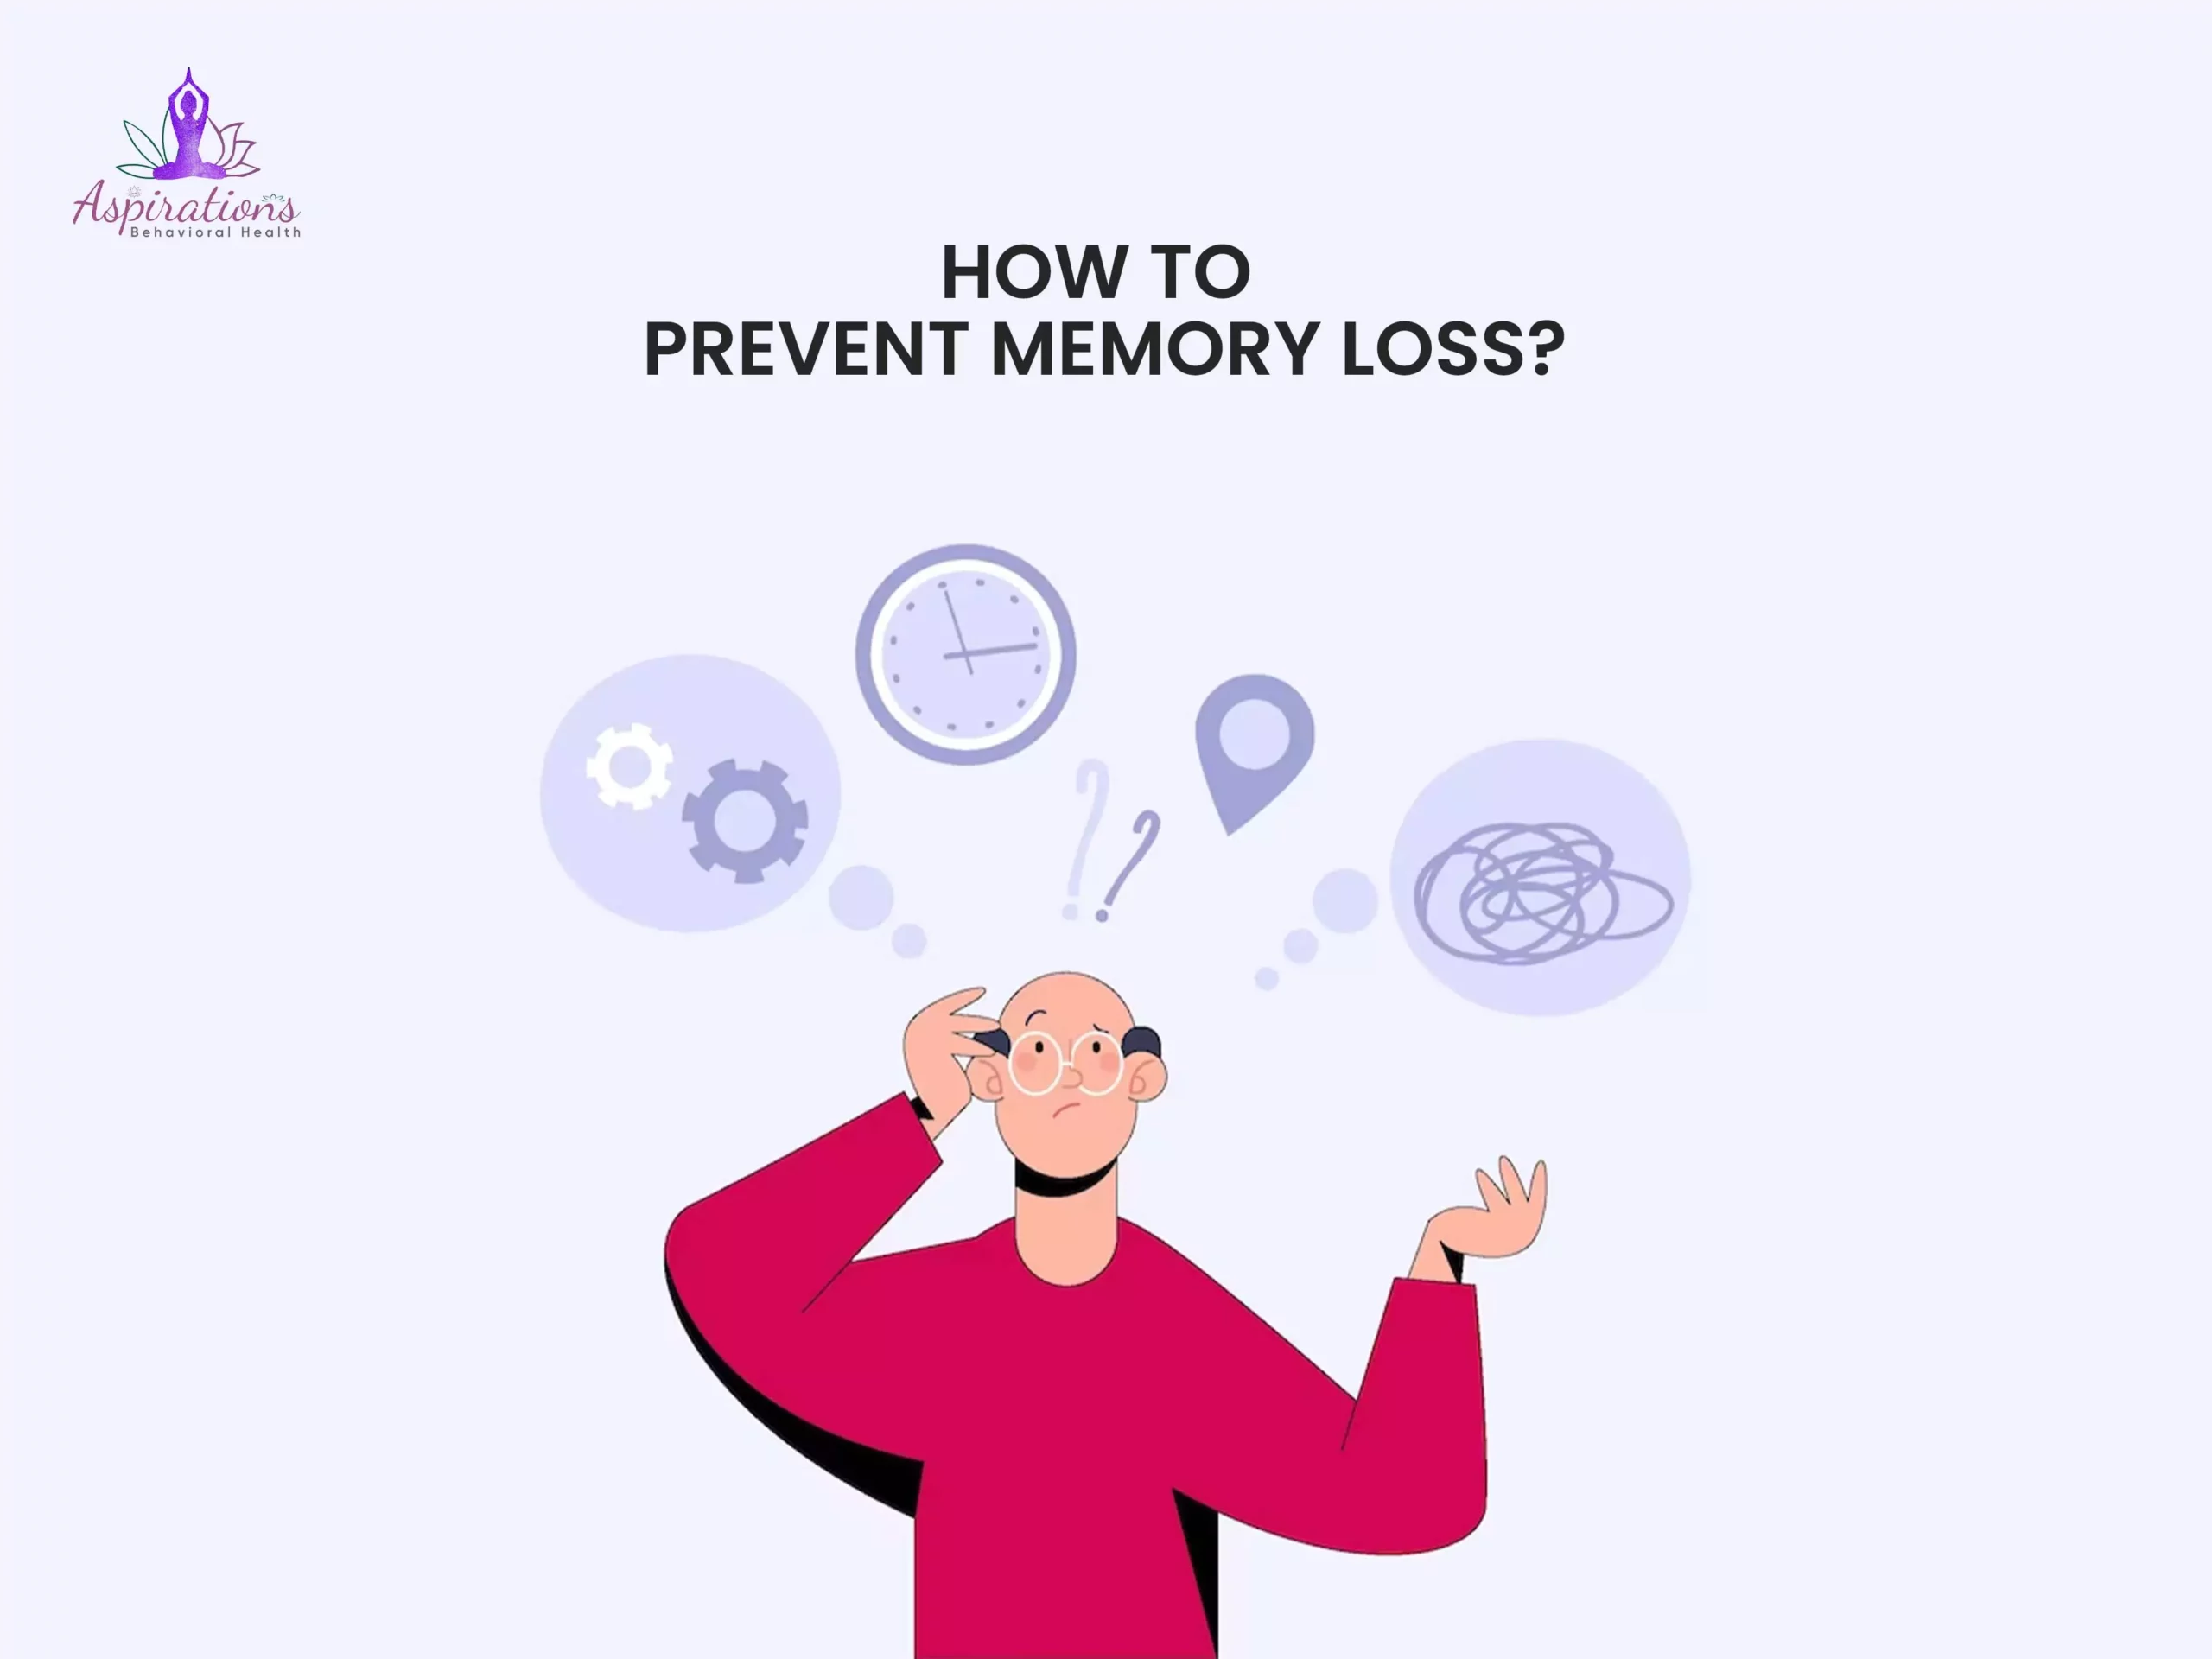 How to Prevent Memory Loss?